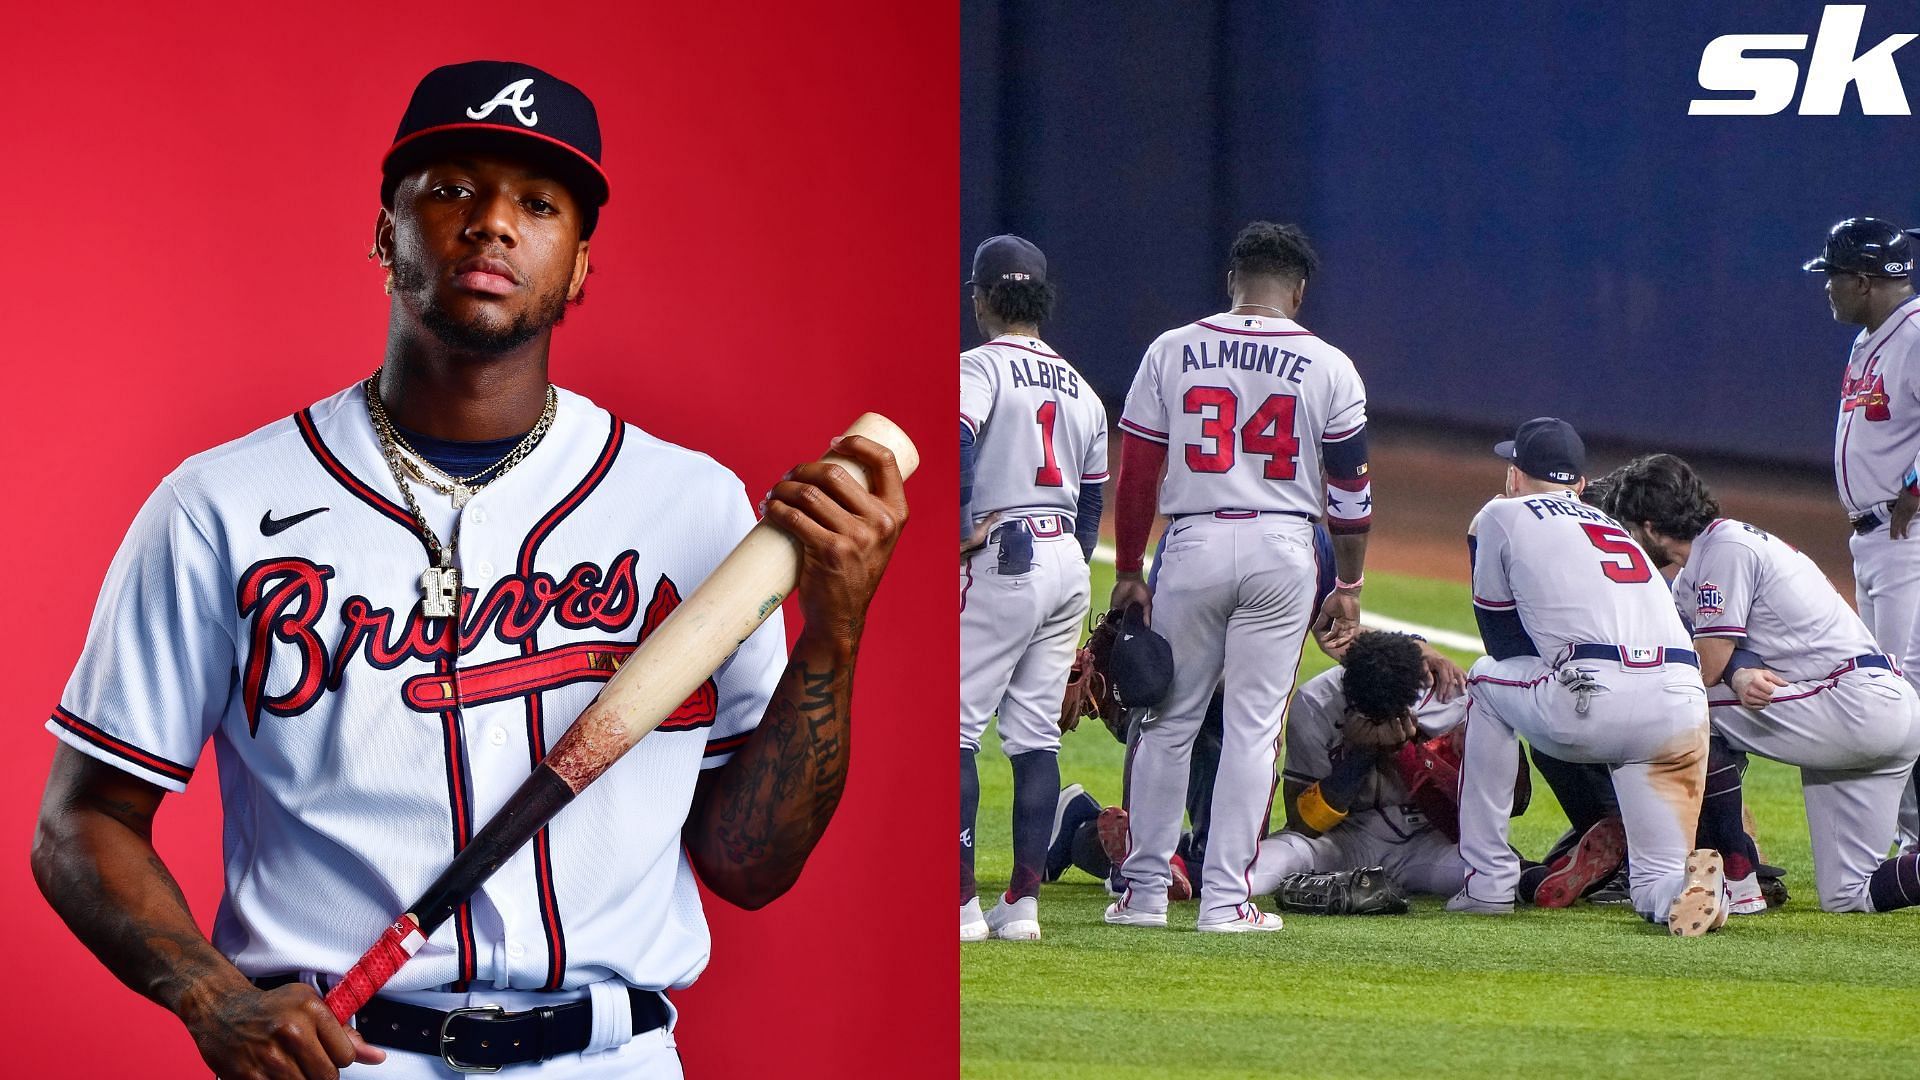 Ronald Acuna Jr. says he had doubts about his playing ability after devastating 2021 injury in interview with Albert Pujols